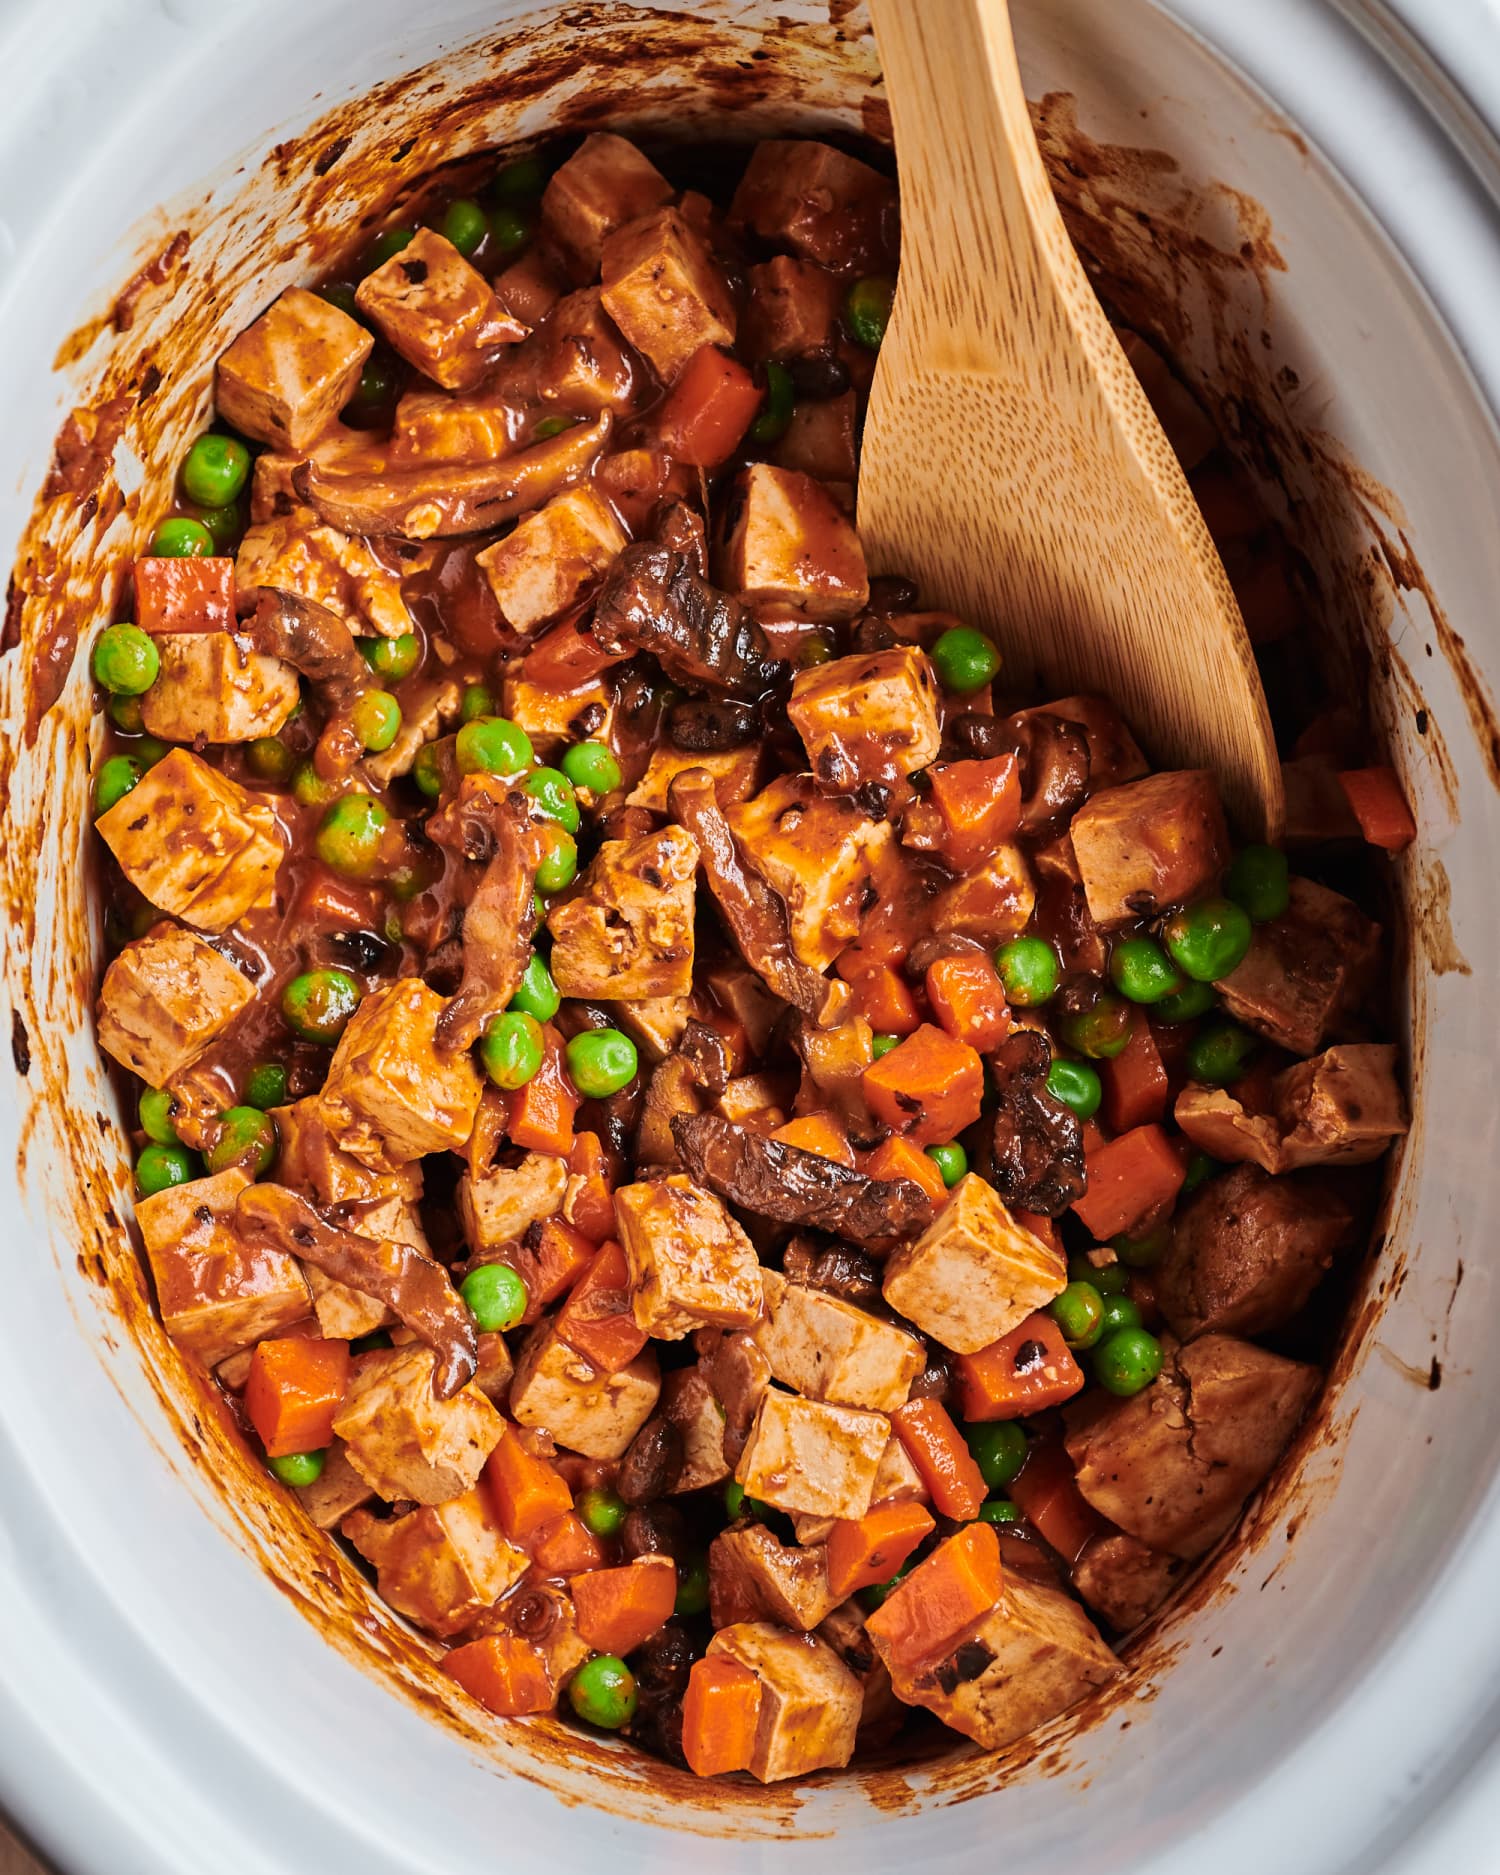 Our 10 Most Popular Slow Cooker Recipes of 2020